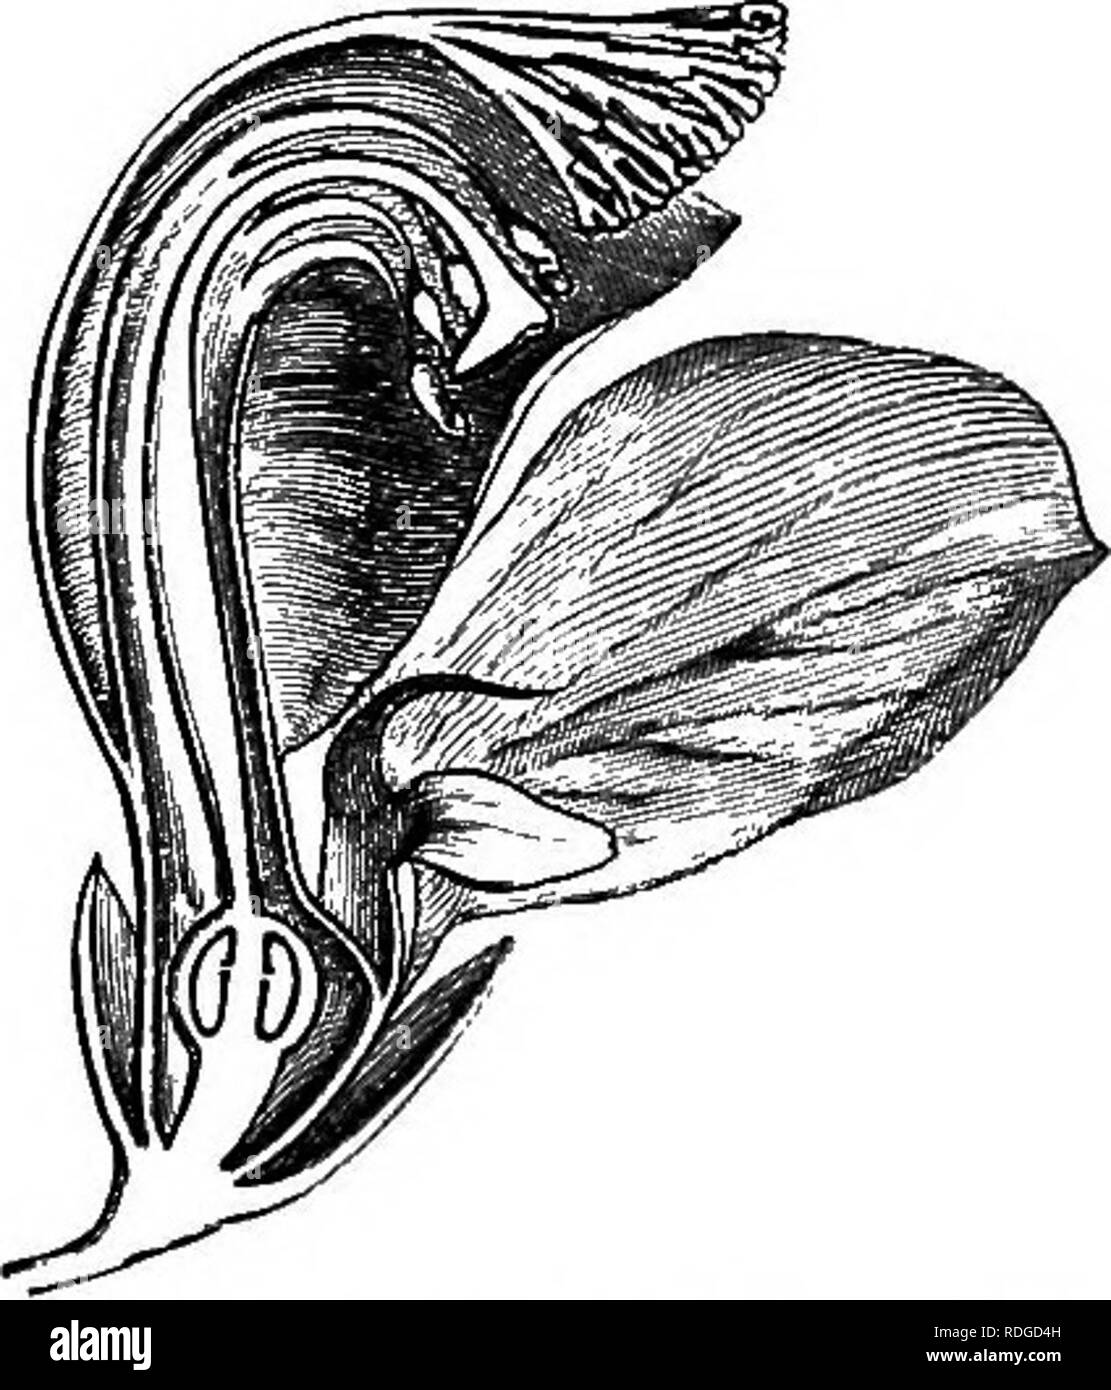 . The natural history of plants. Botany. Fig. 105. Diagram. Fig. 104; Floriferous branch. Fig. 106. Long. sect, of flower {). upwards, the calyx, corolla, androceum, and gynseceum. The calyx is formed of five very dissimilar pieces, imbricated in quincuncial ^ Pohjgala T. Imt. 174, t. 79.—L. Gen. n. 851.—Abans. Fam. dus PI ii. 358.—J. Gen. 99. —Lamk. Diet. V. 485; Suppl. iv, 474; III. t. 598.—DC. Prodr. i. 321.—Tukp. in Diet. So. Nat. Atl. t. 174.—A. S. H. et MoQ. in . Mus. xvii. 915, t. 27, 28; xix. 326.—Spach, Suit, cb Buffon, xii. 117.—Endl. Gen. n. 5647.— Paybk, Organog. 139, t. 31.—A. Gr Stock Photo